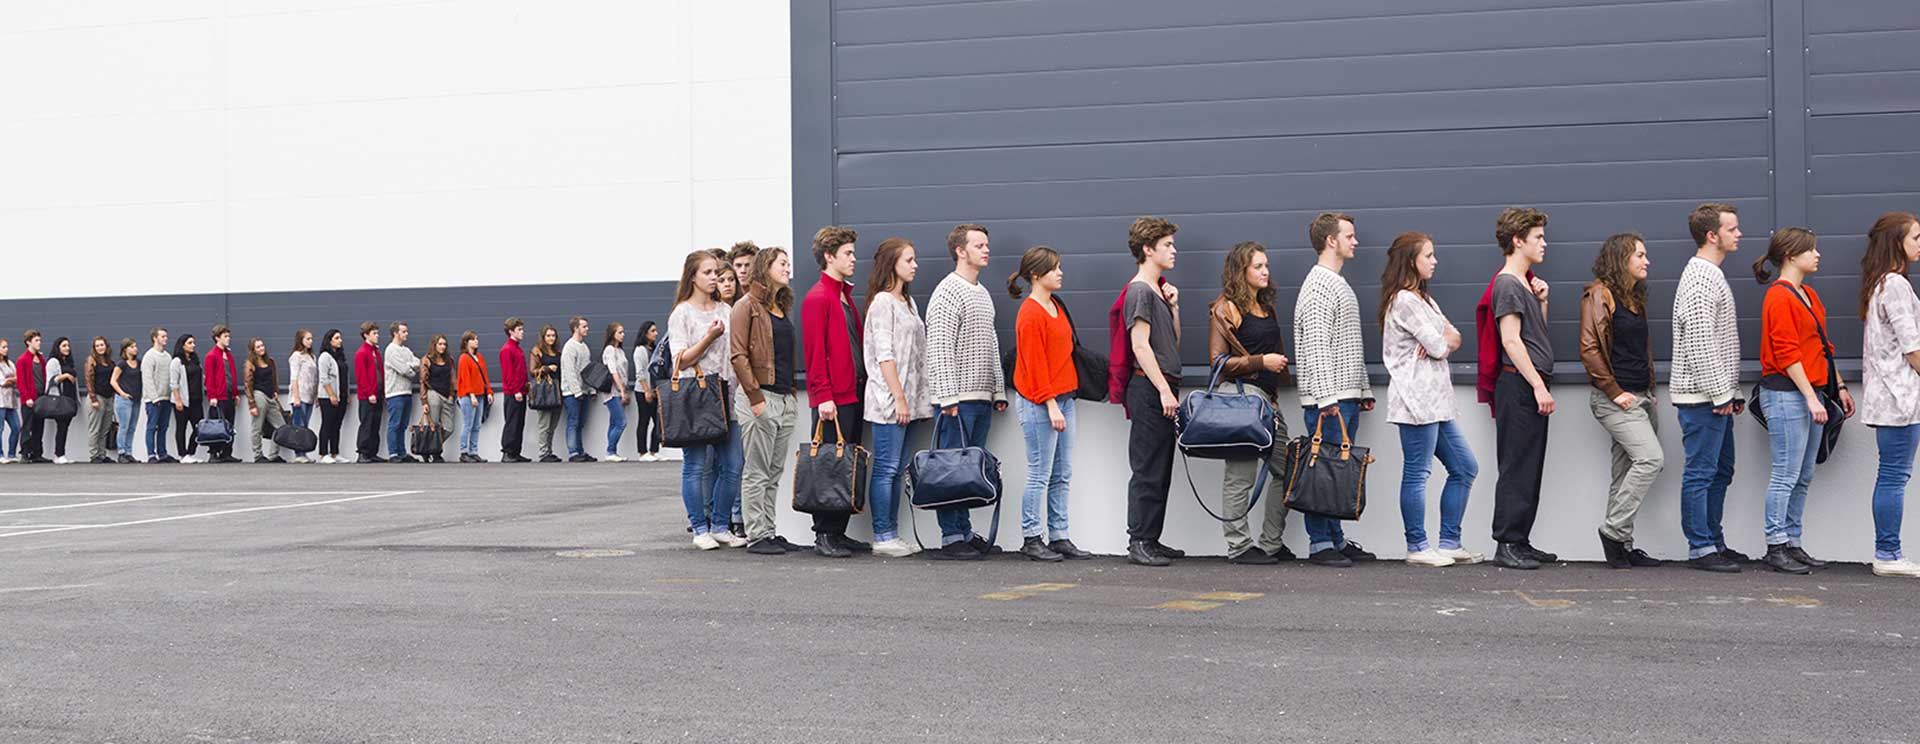 What Is Queuing Theory?